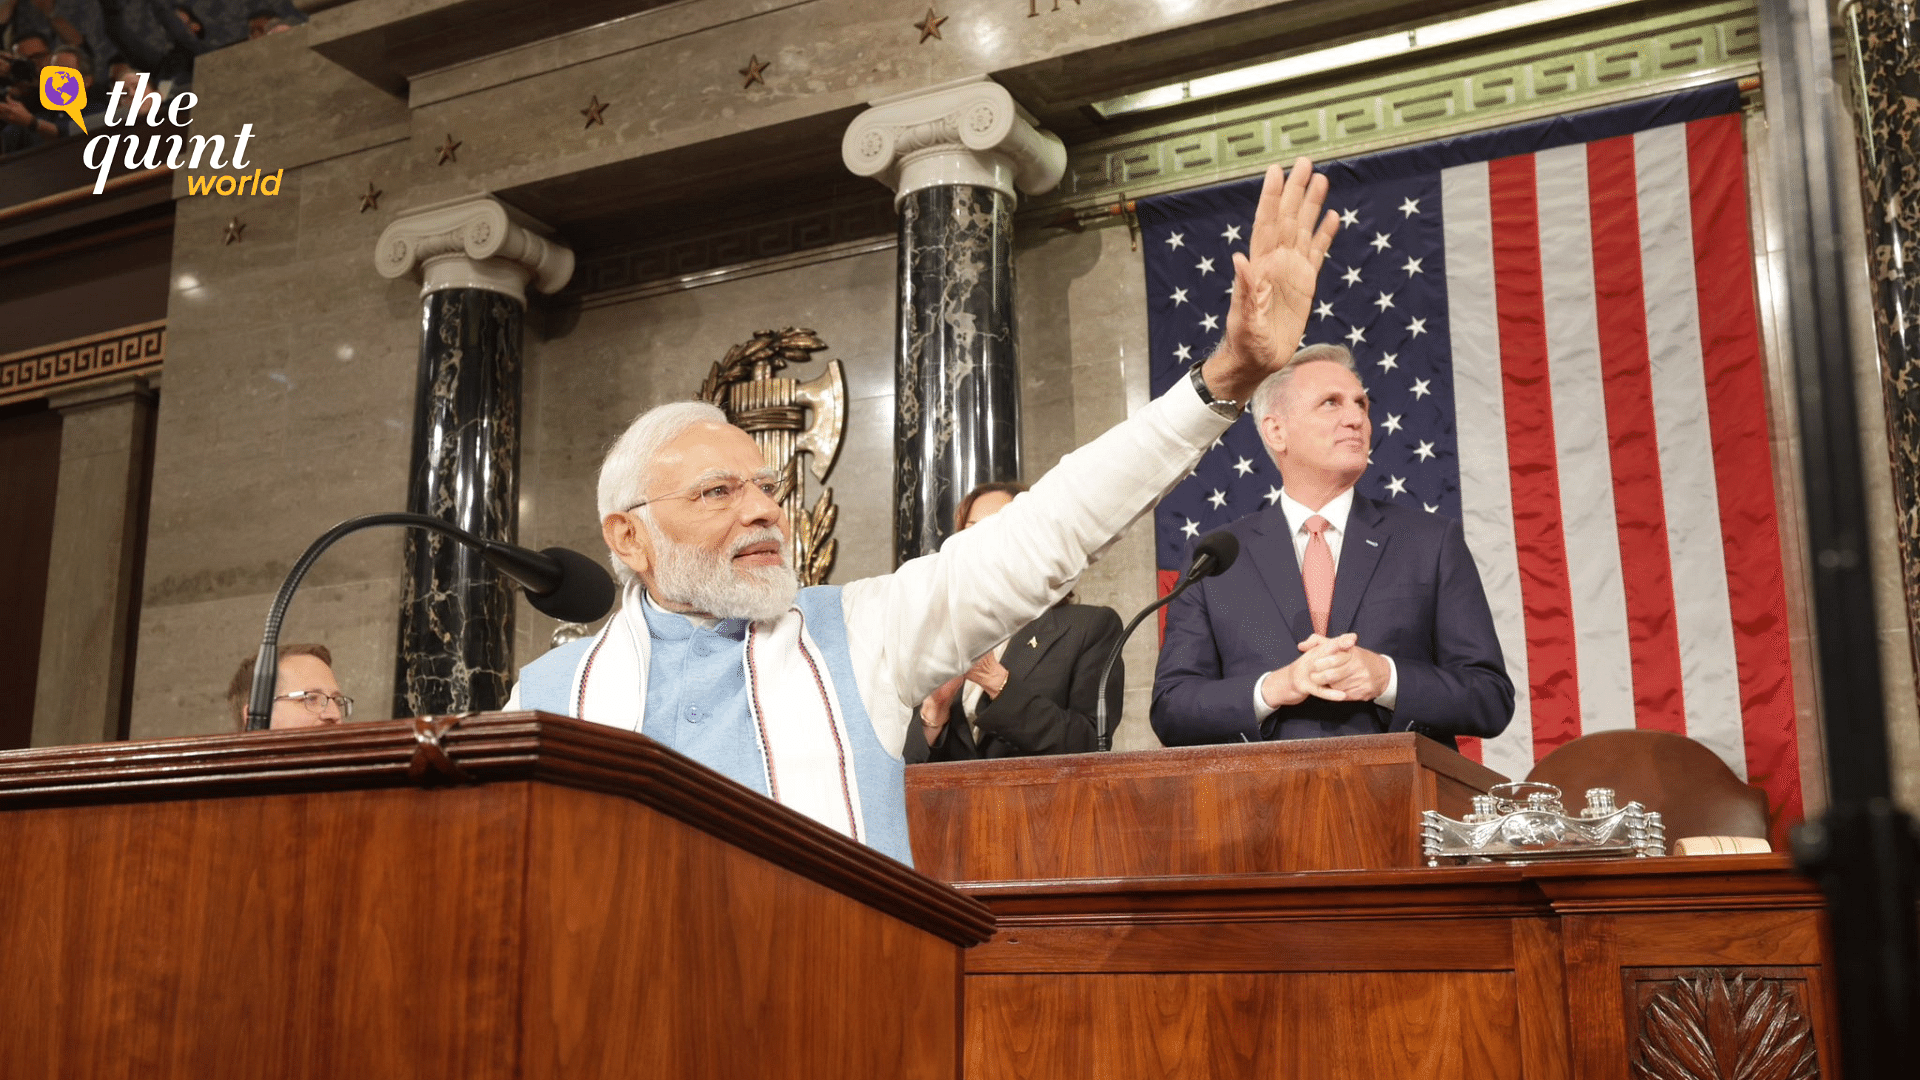 <div class="paragraphs"><p>Indian Prime Minister Narendra Modi received an enthusiastic reception as he delivered a speech to Congress on Thursday, highlighting the deepening ties and shared ambitions between the world's two largest democracies.</p></div>